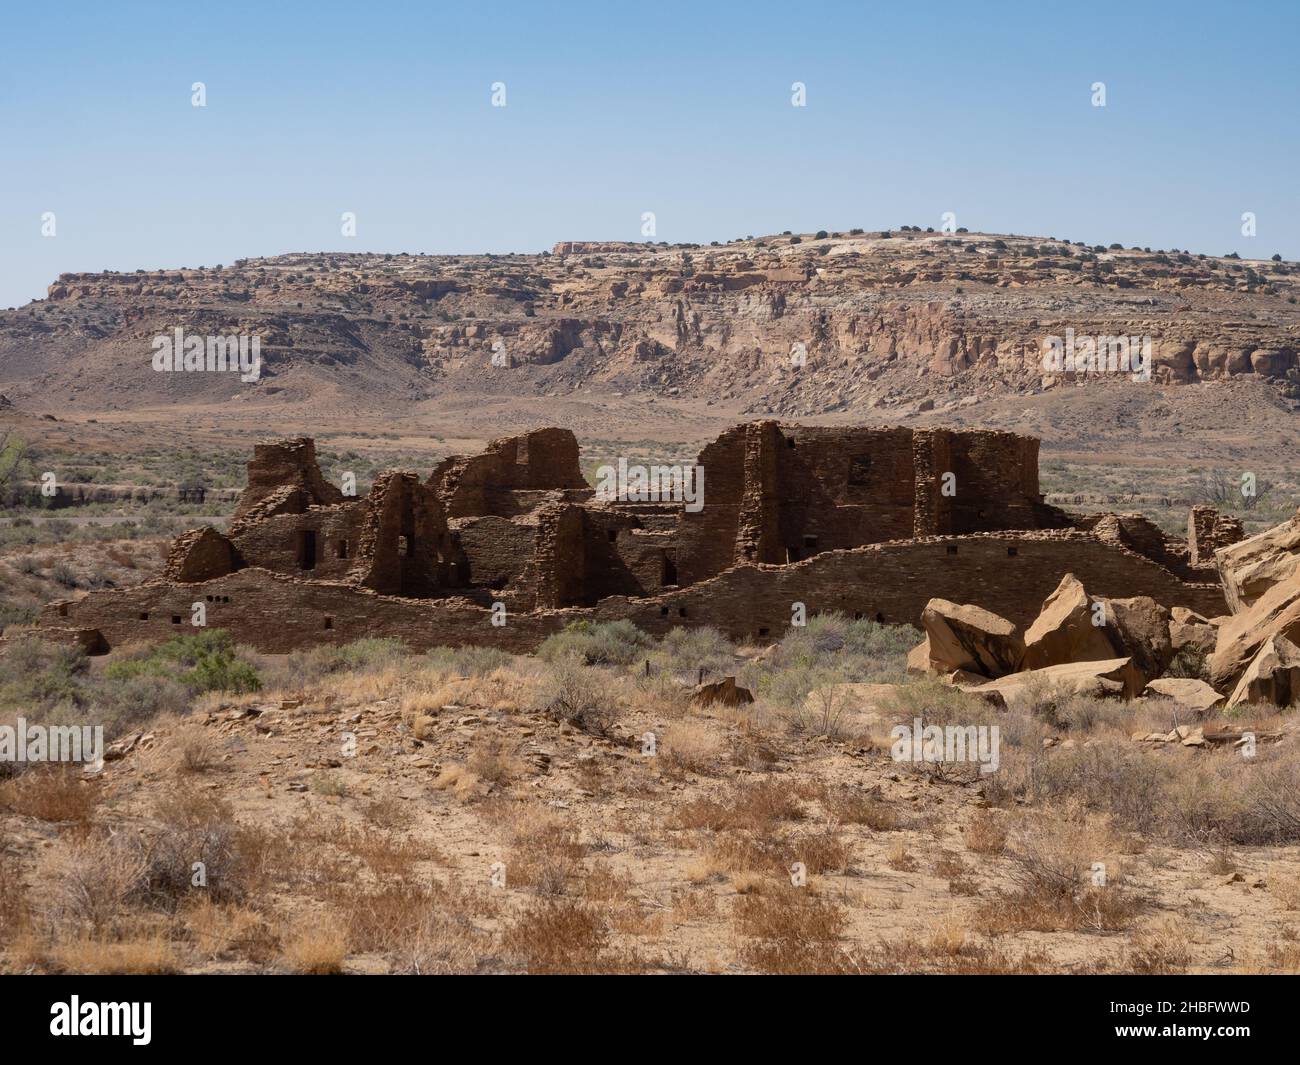 Ruins left by Ancient Puebloans at Chaco Culture National Historic Park in New Mexico with a mountain in the background. Stock Photo